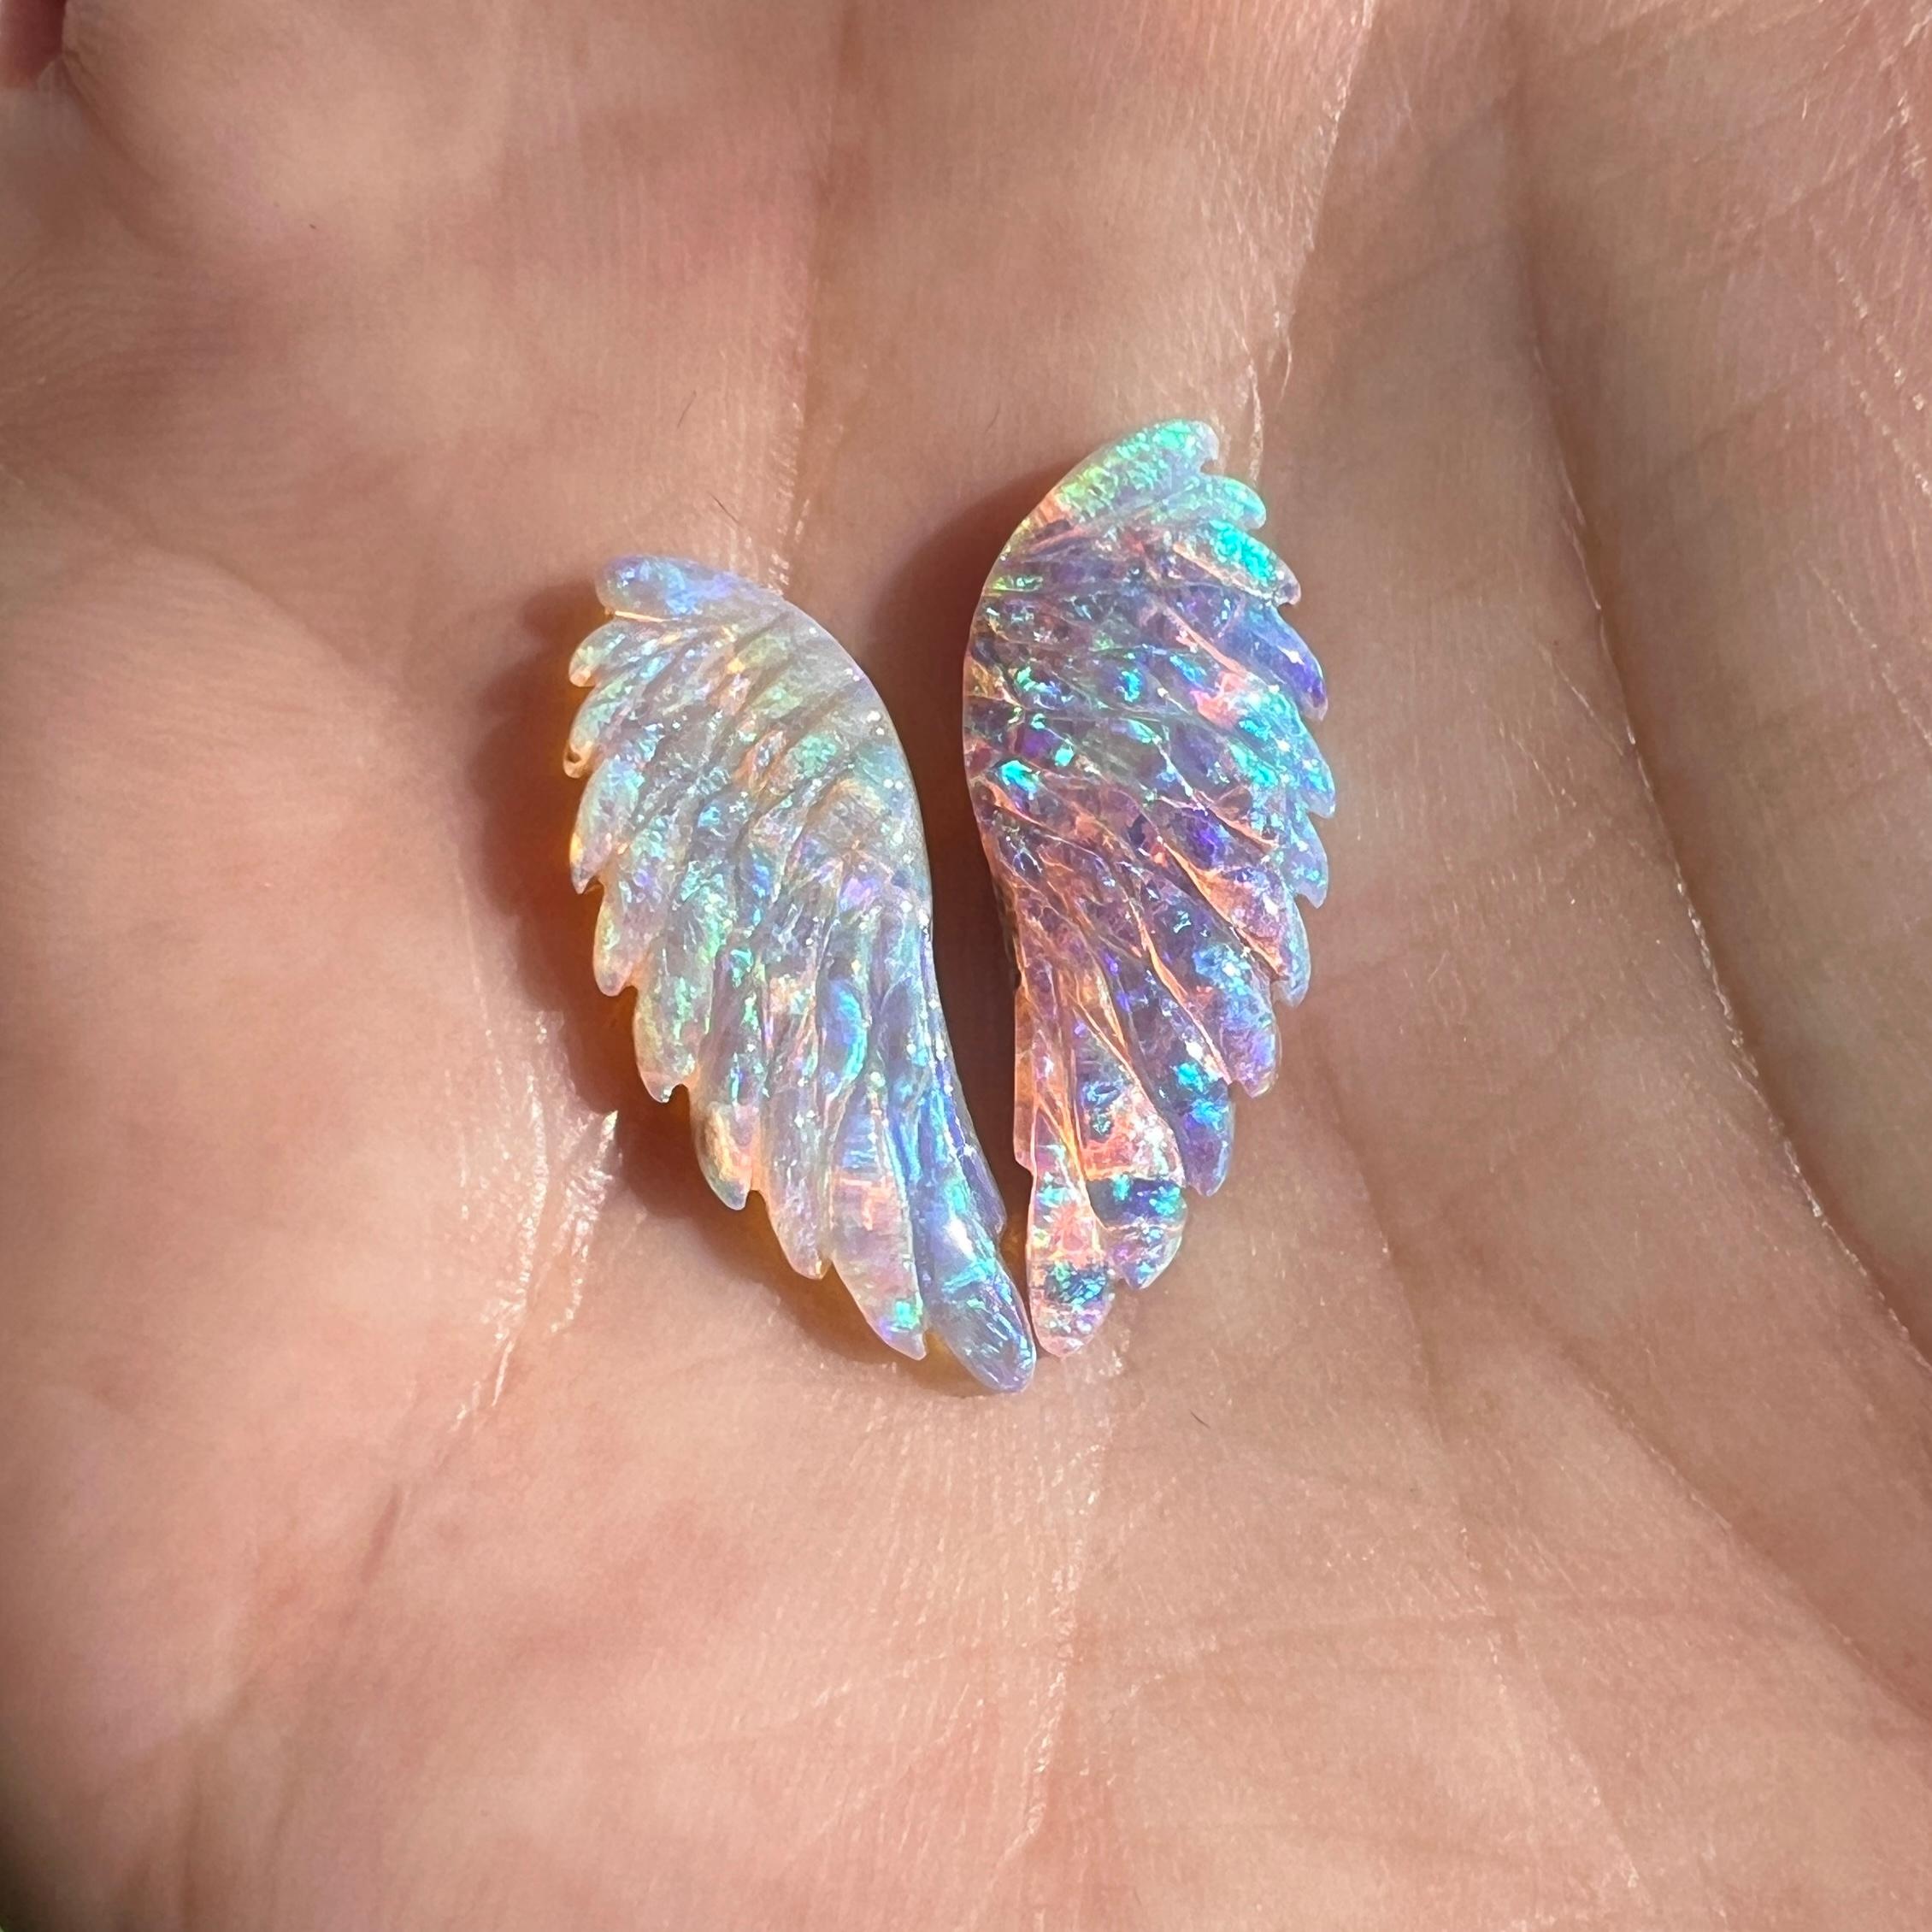 Cabochon Natural 6.07 Ct Australian Gem Crystal Angel Wings Opal mined Sue Cooper 